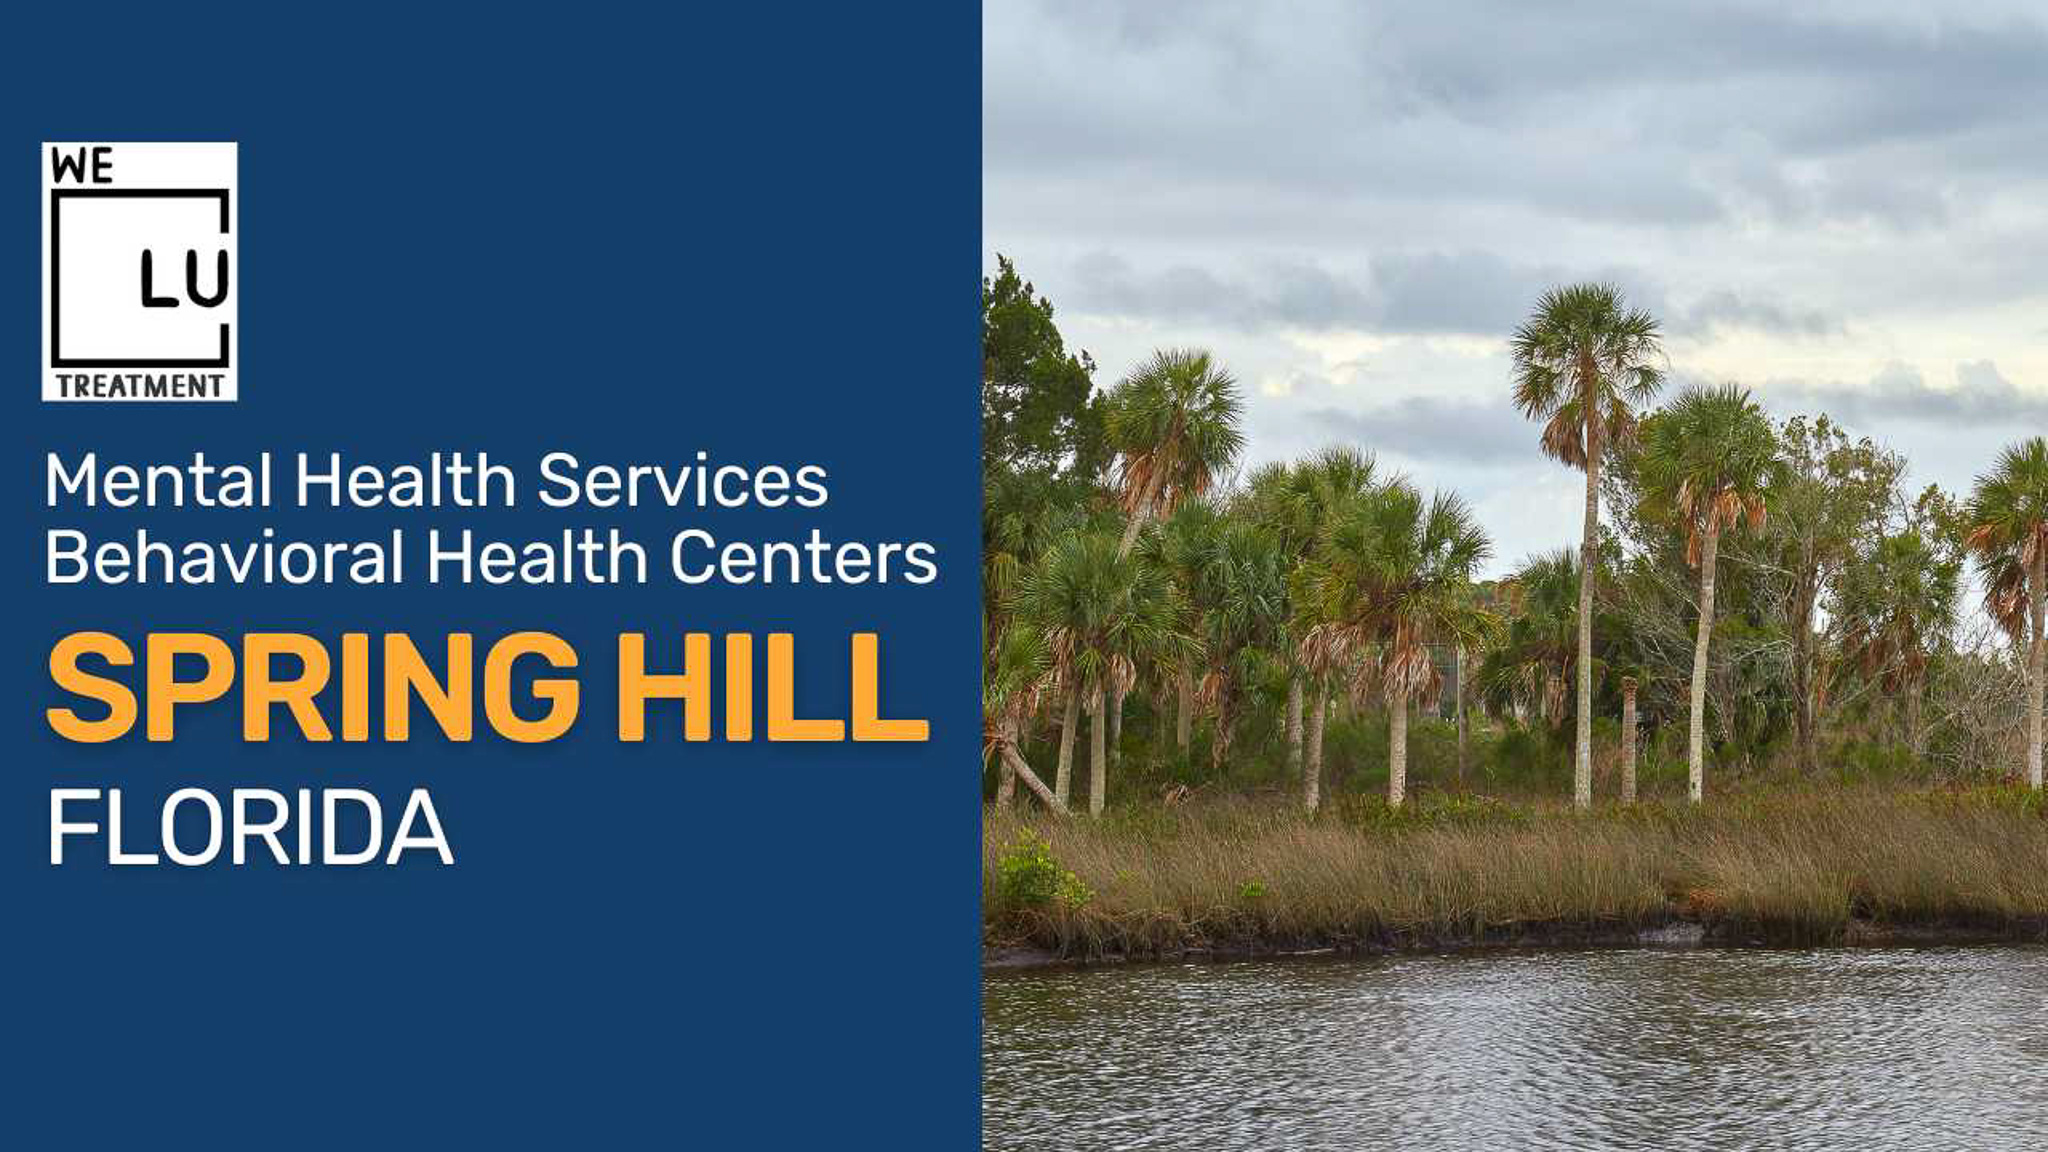 Spring Hill FL (MH) We Level Up treatment center for drug and alcohol rehab detox and mental health services - Image 1